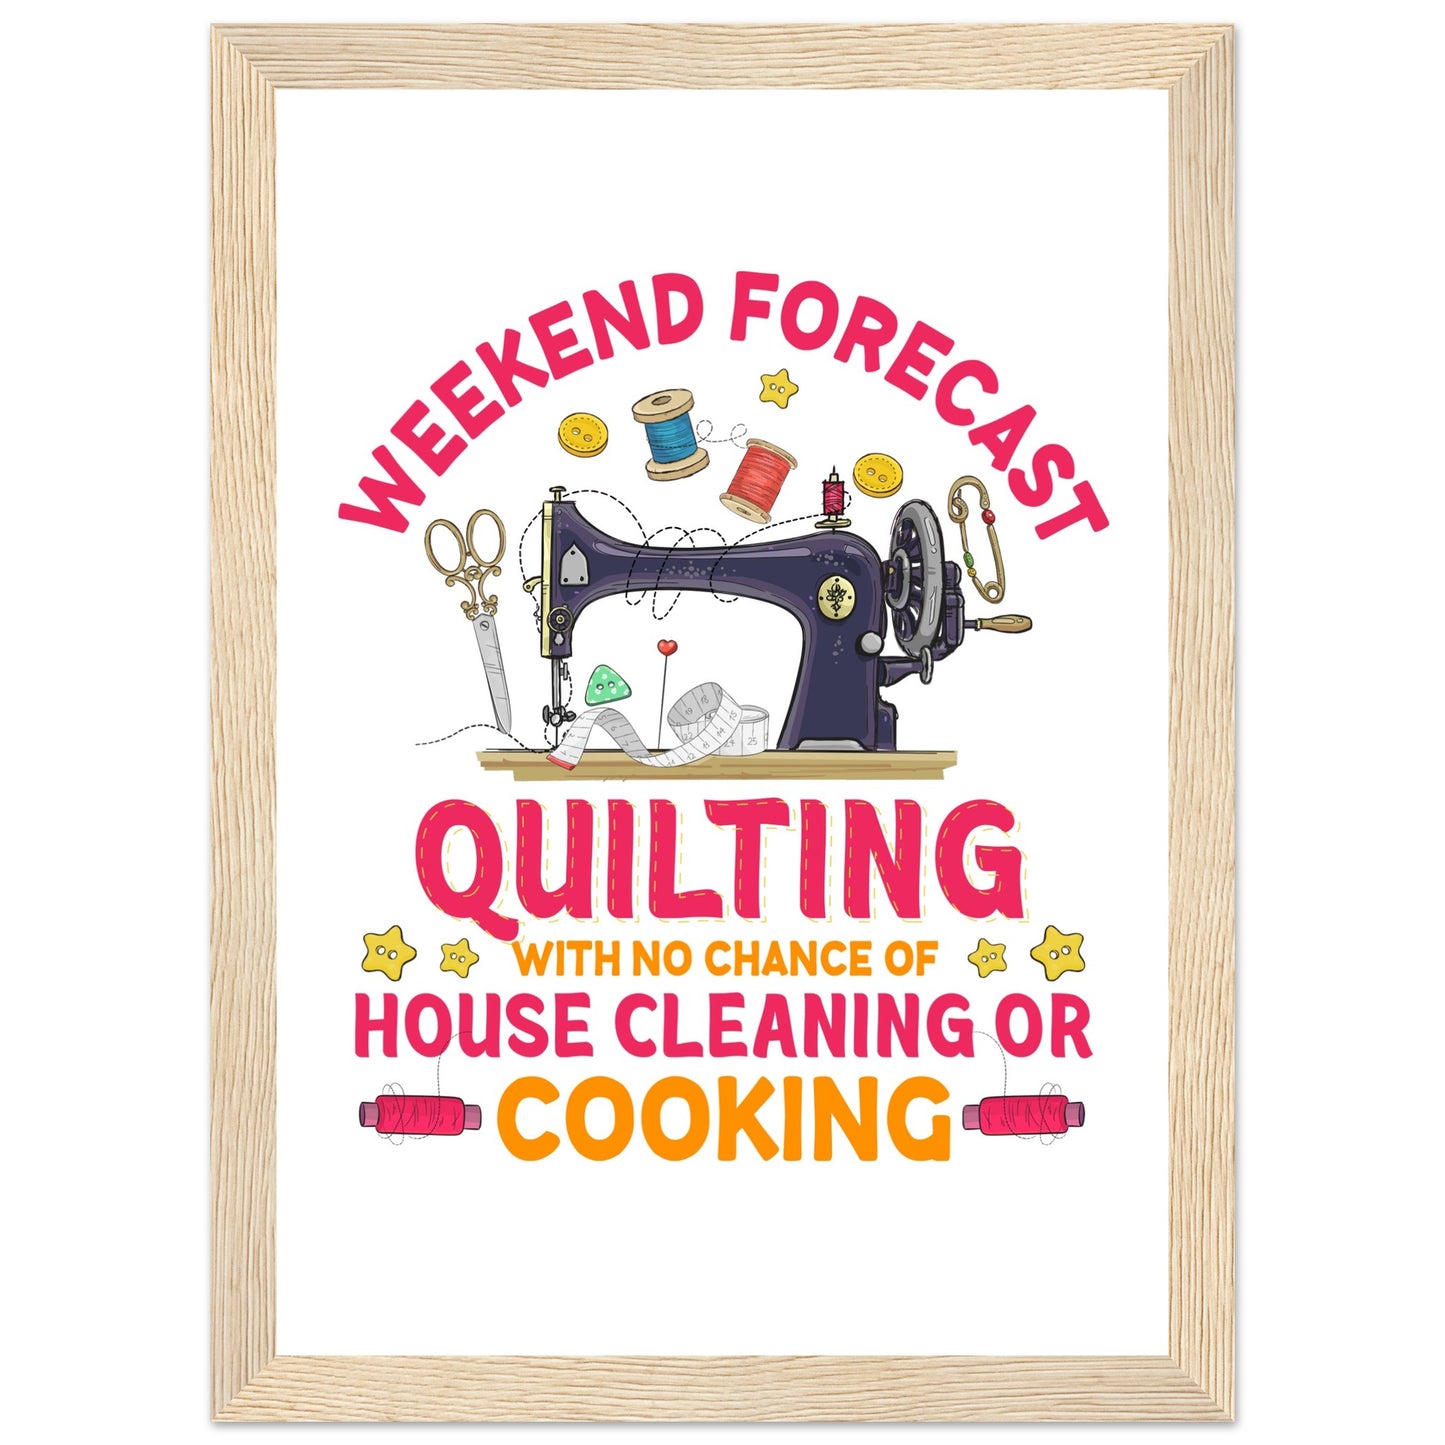 Weekend Forecast Quilting with No Chance of House Cleaning or Cooking - Quilting Wall Art - Premium Matte Paper Wooden Framed Poster